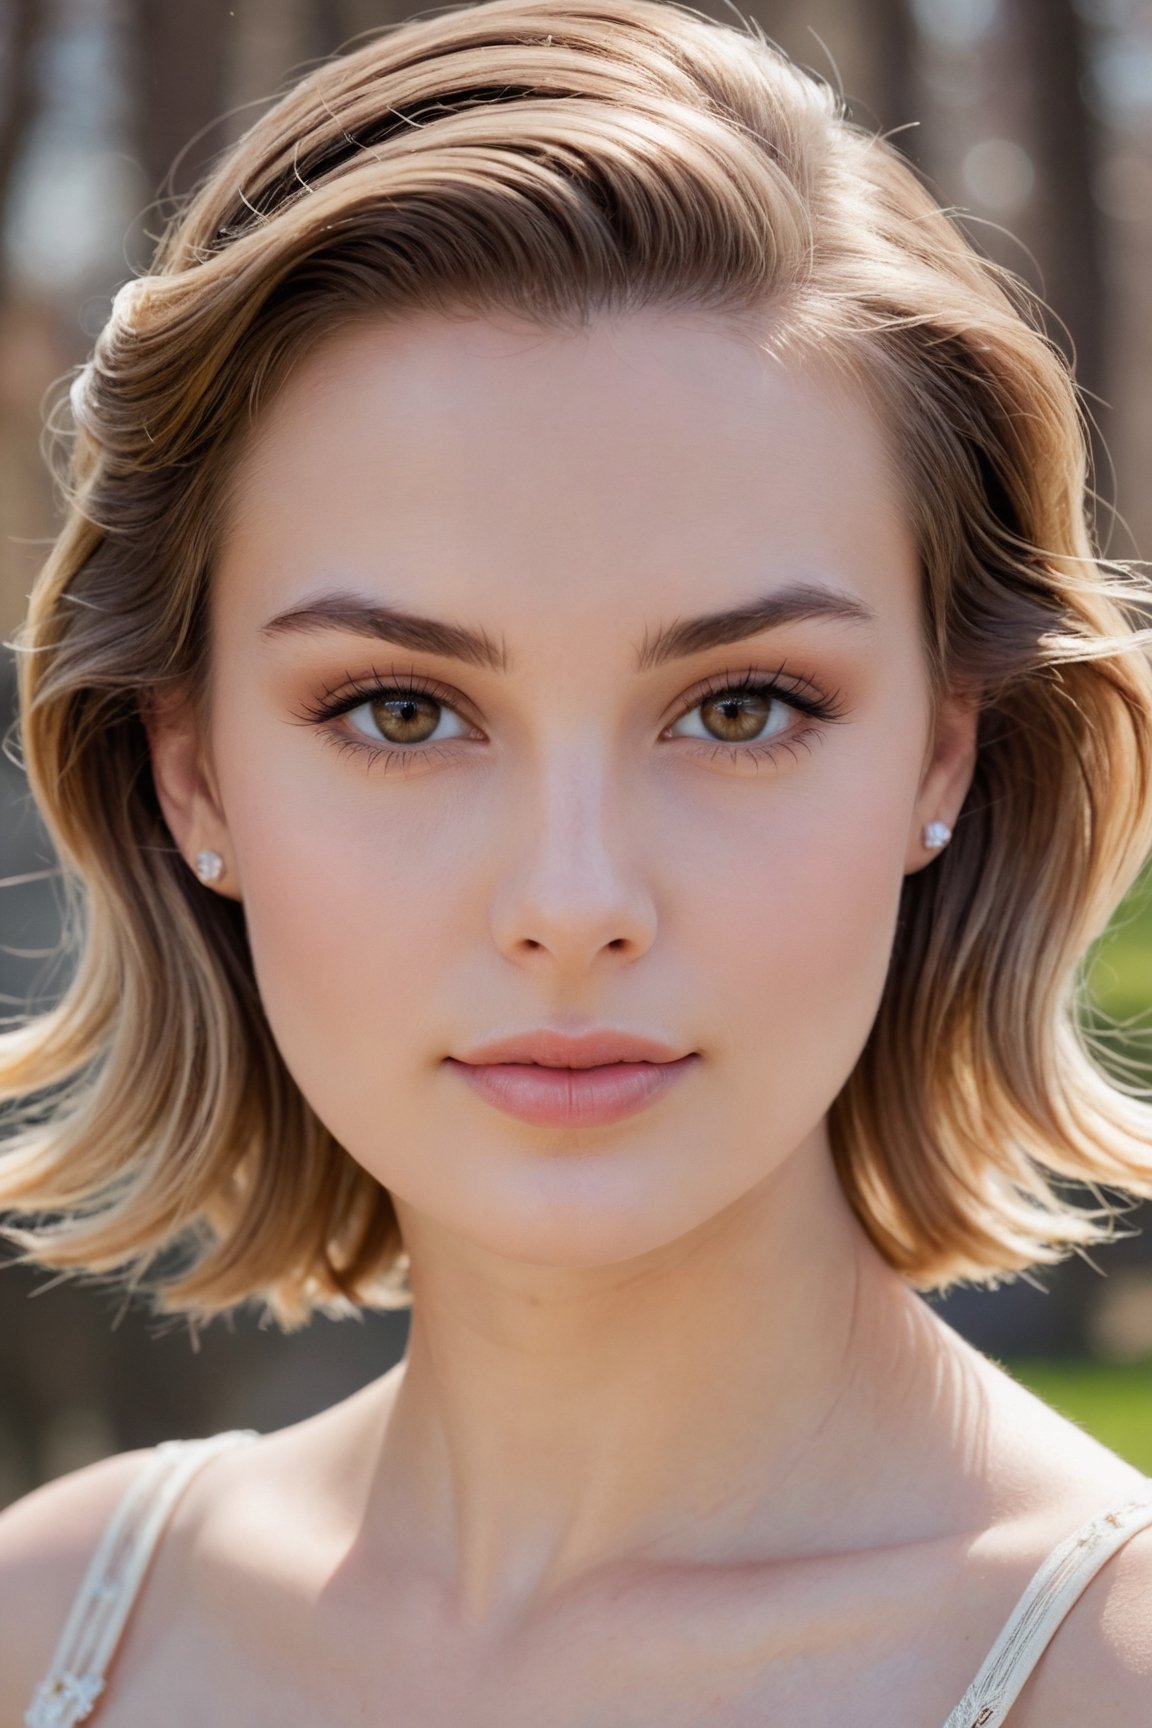 headshot,Nudity,Naked,Nude,No Clothes,Brown with streaks hair,face similar to Grace Kelly,Russian,pale skin,Balayage Hairstyle,Neutral eyeshadow makeup,21 year old,Boyish_normal_breasts,headshot,Sunny Day Spring,Posing for a photo

